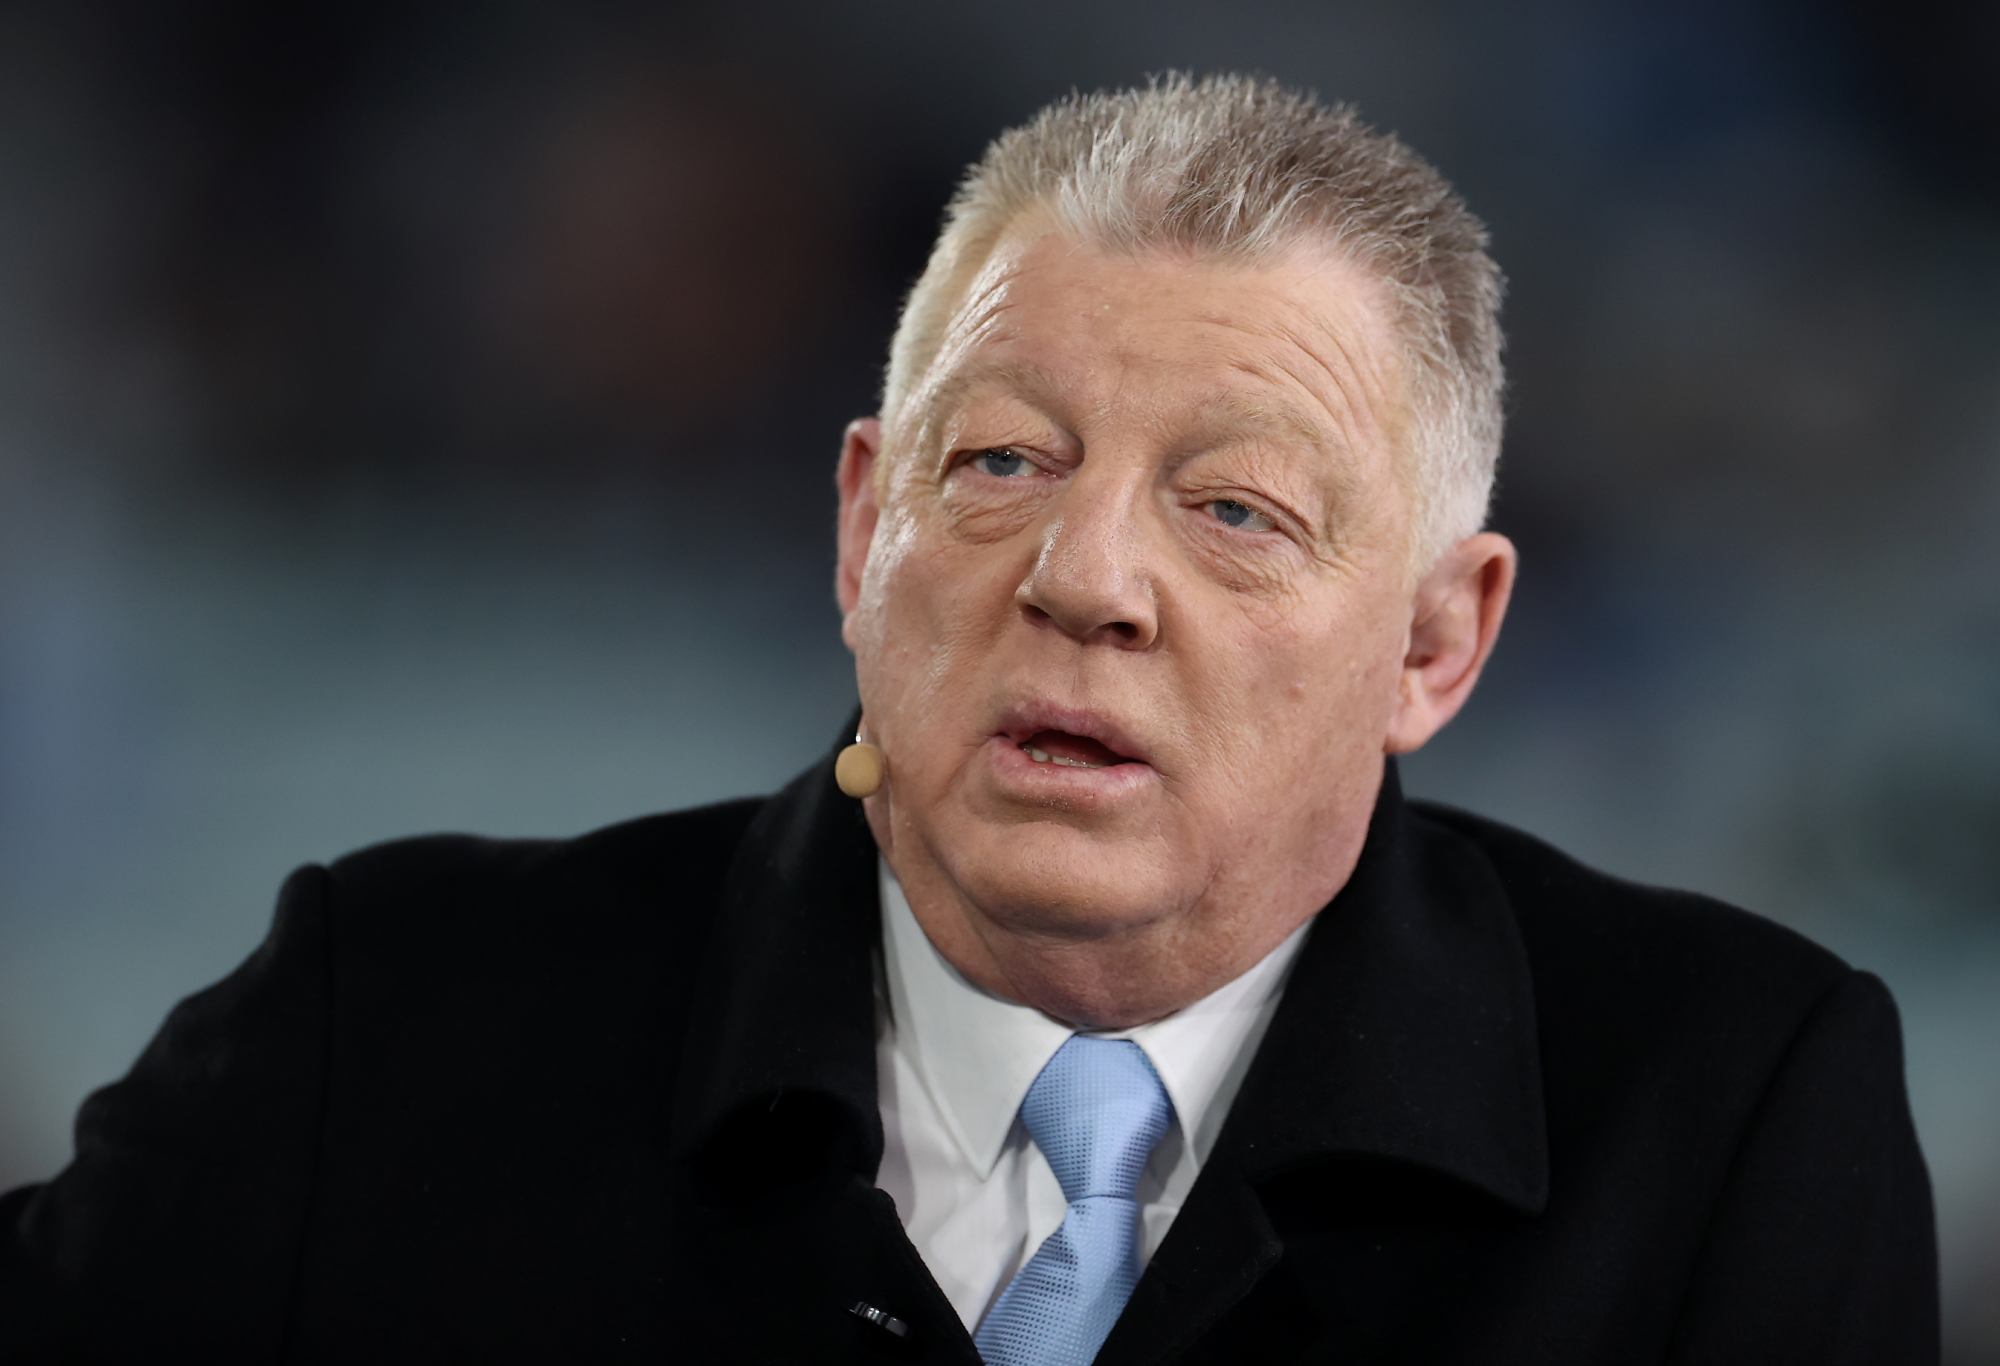 SYDNEY, AUSTRALIA - JUNE 08: Commentator and General Manager of the Canterbury-Bankstown Bulldogs Phil Gould looks on during game one of the 2022 State of Origin series between the New South Wales Blues and the Queensland Maroons at Accor Stadium on June 08, 2022, in Sydney, Australia. (Photo by Mark Kolbe/Getty Images)